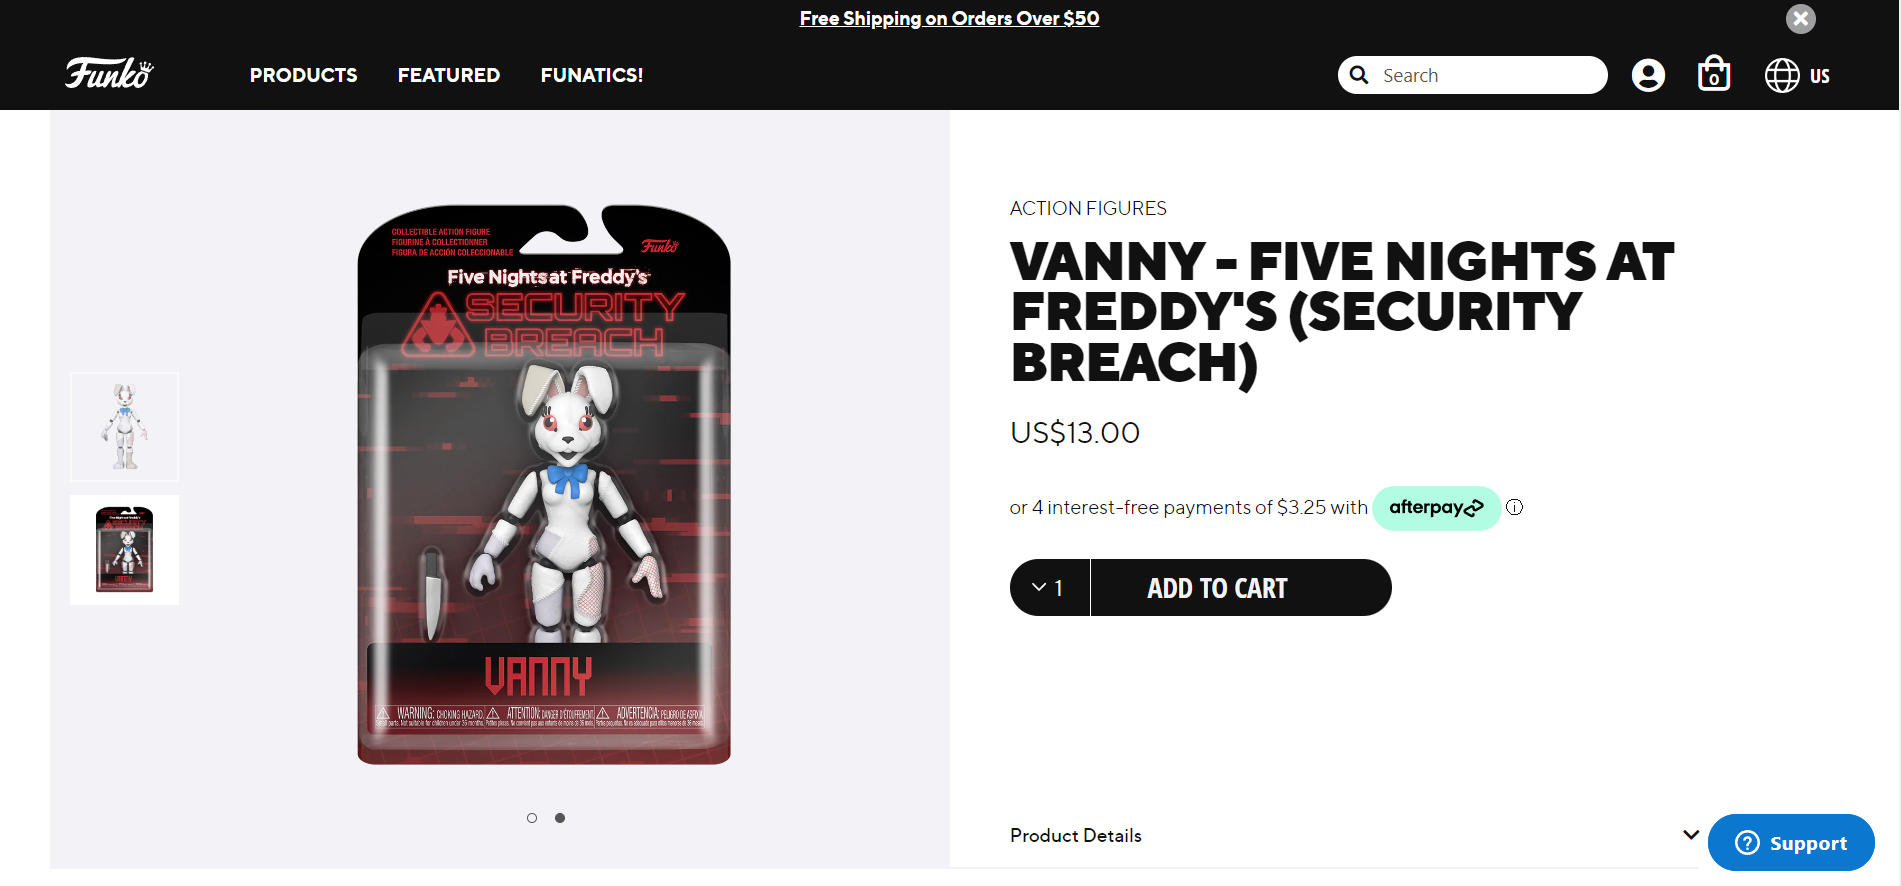 Five Nights at Freddy's (FNAF) Security Breach action figures